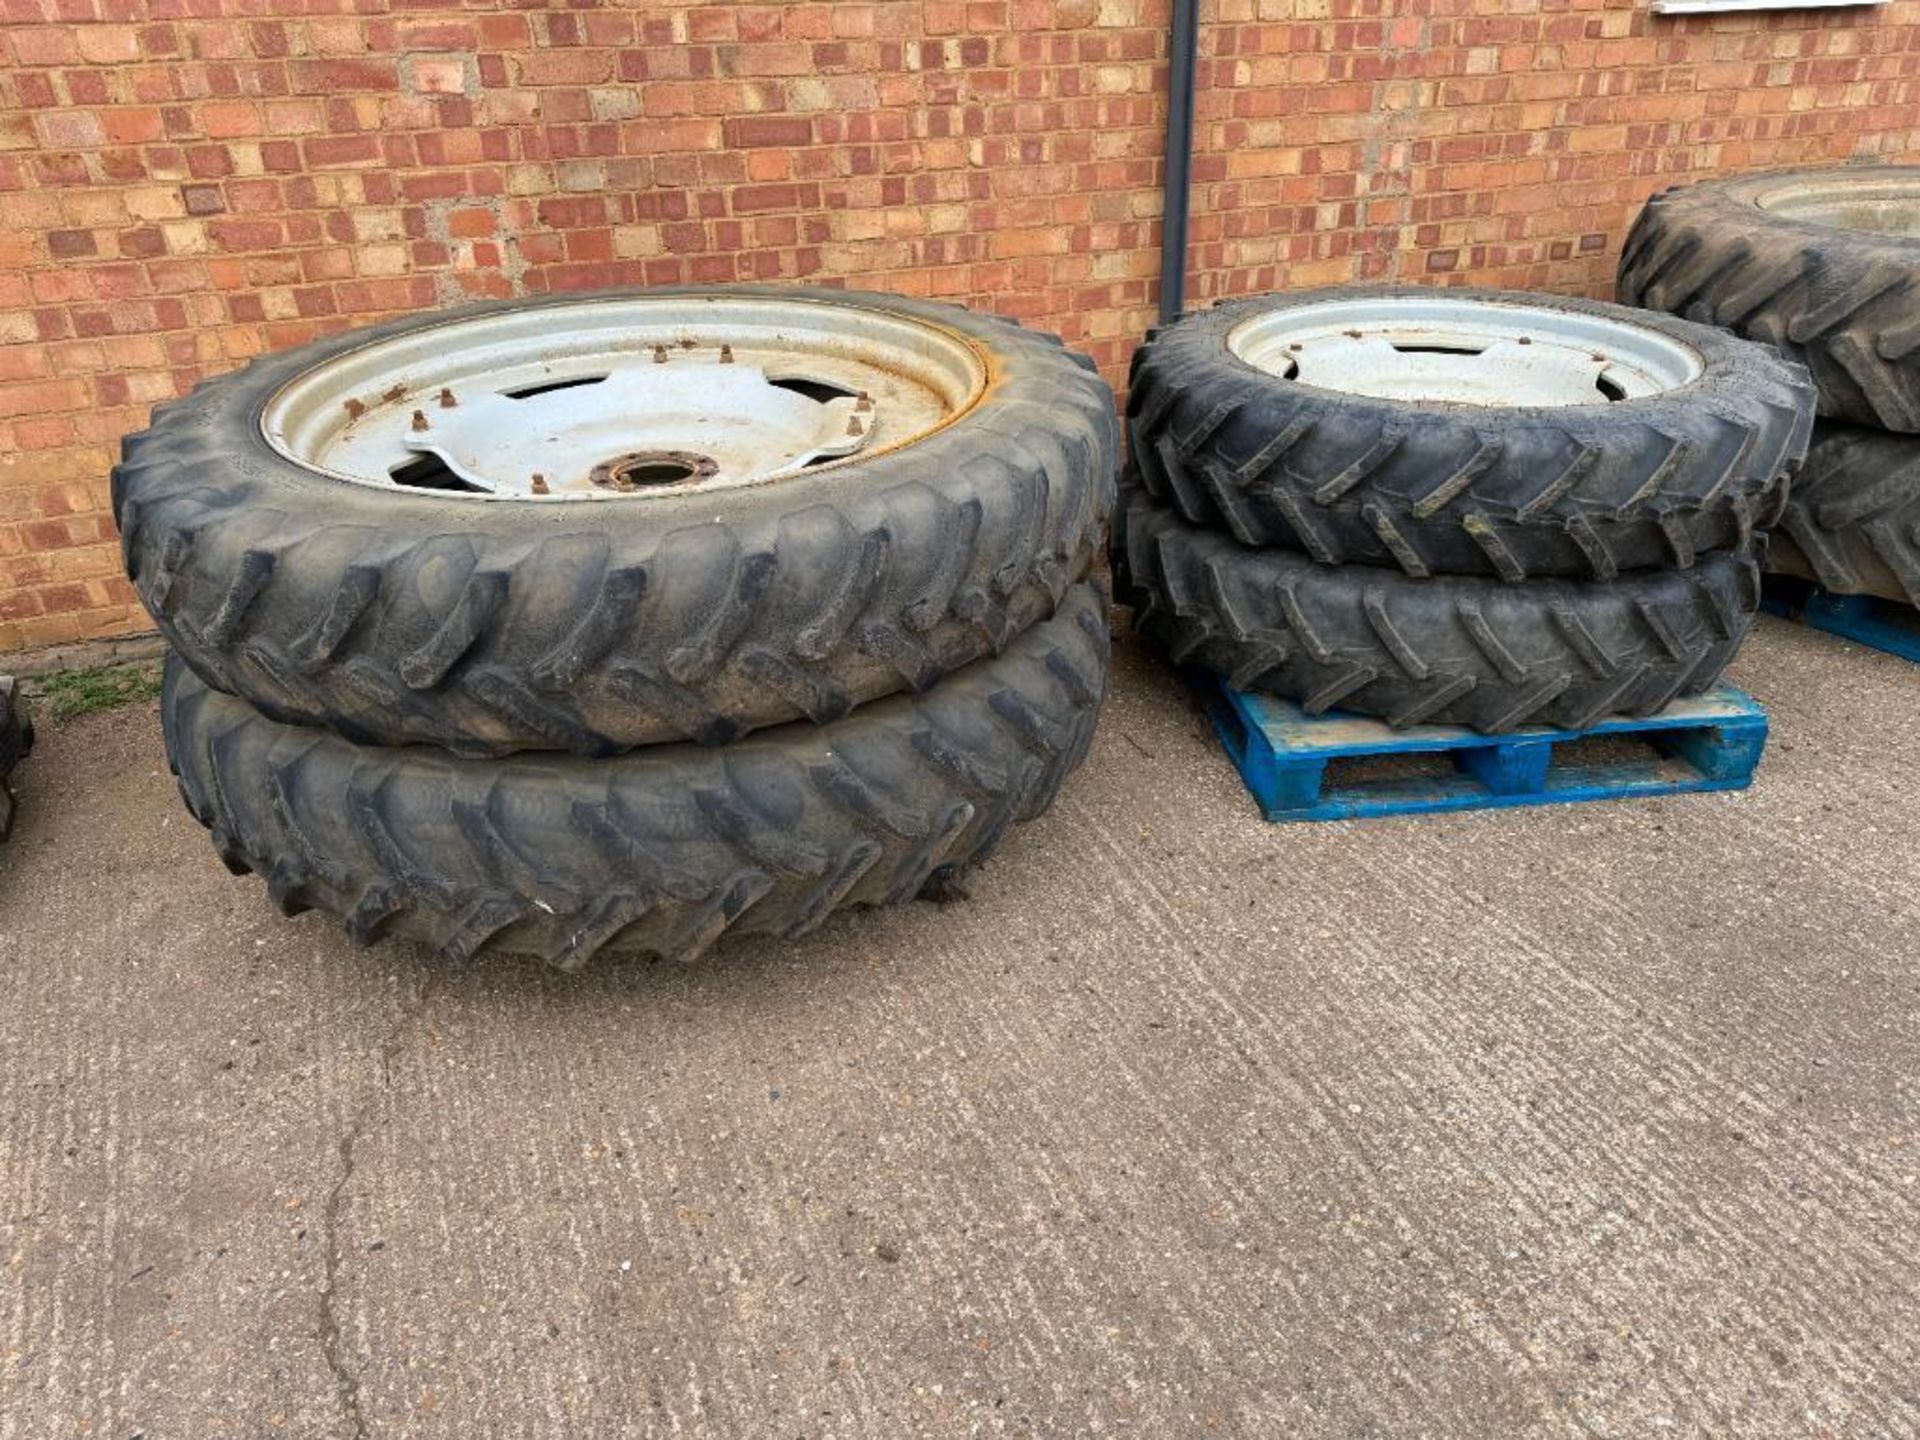 Set Alliance 13.6R48 rear and BKT 11.2R36 front row crop wheels and tyres on Massey Ferguson centres - Image 2 of 8